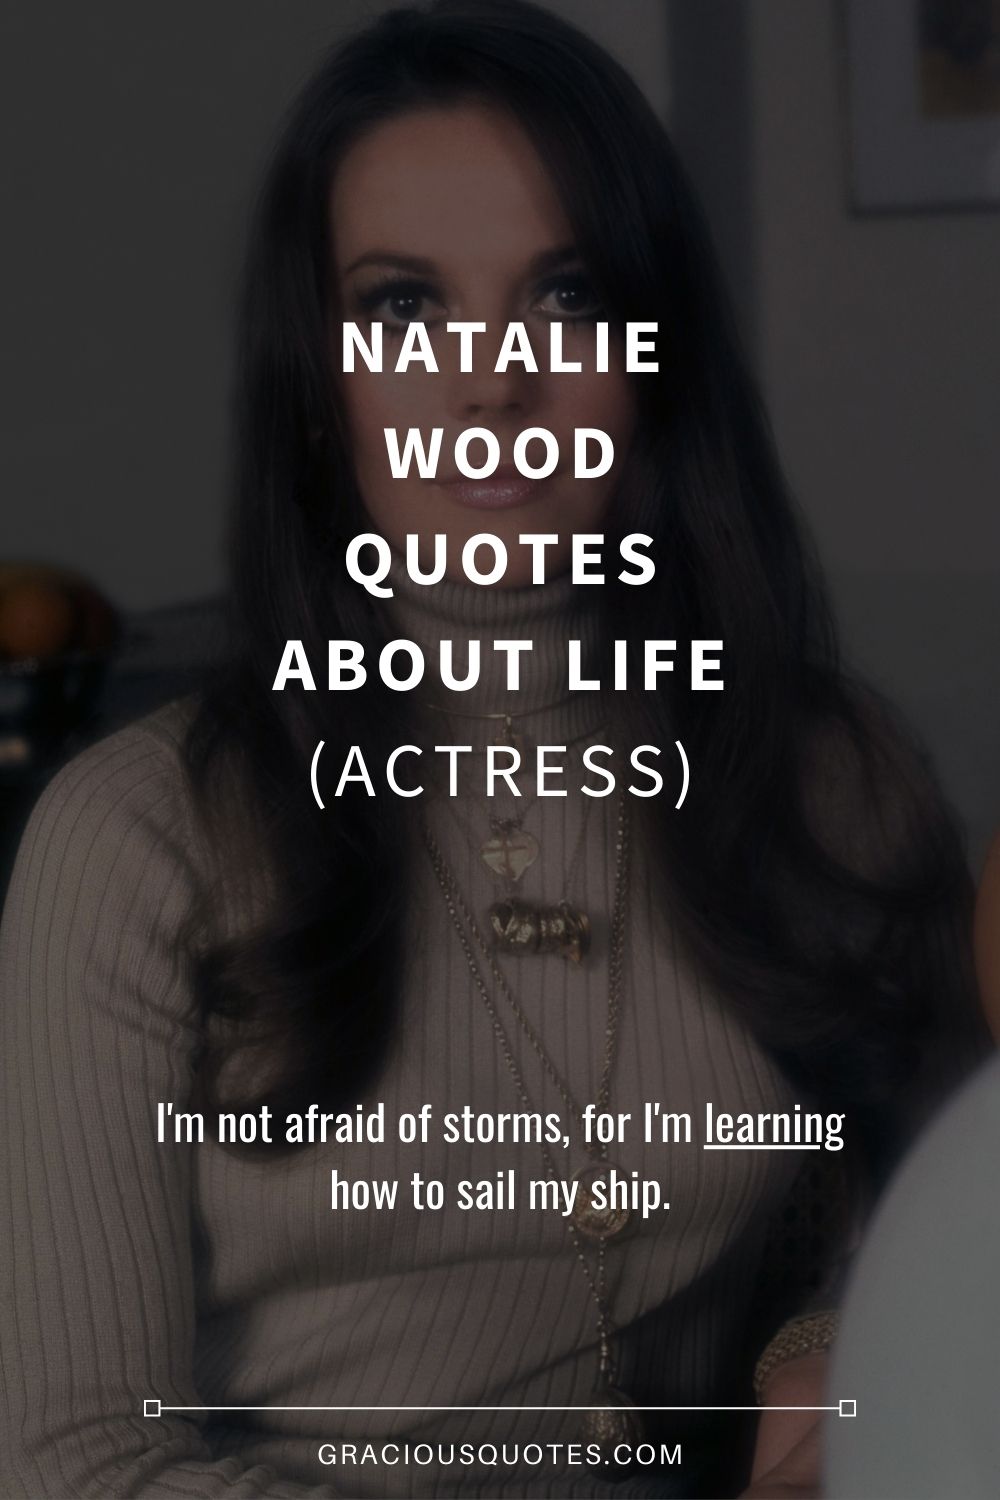 Natalie Wood Quotes About Life (ACTRESS) - Gracious Quotes